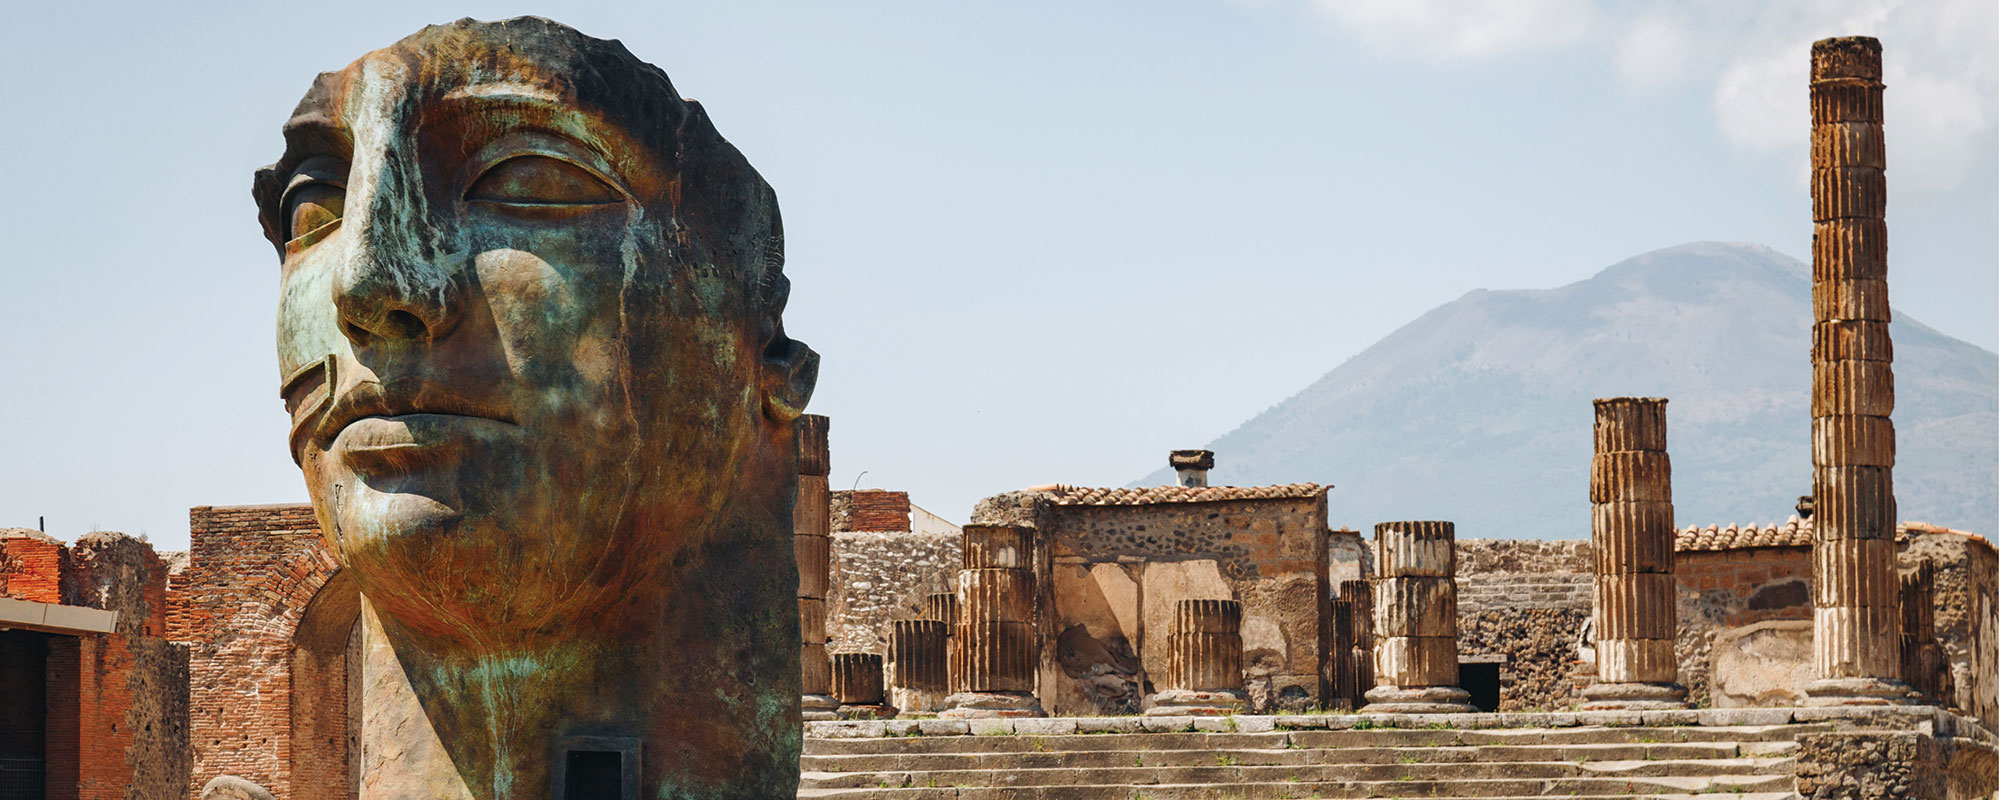 A few of a city ruins with a large sculpture of a human face in the foreground